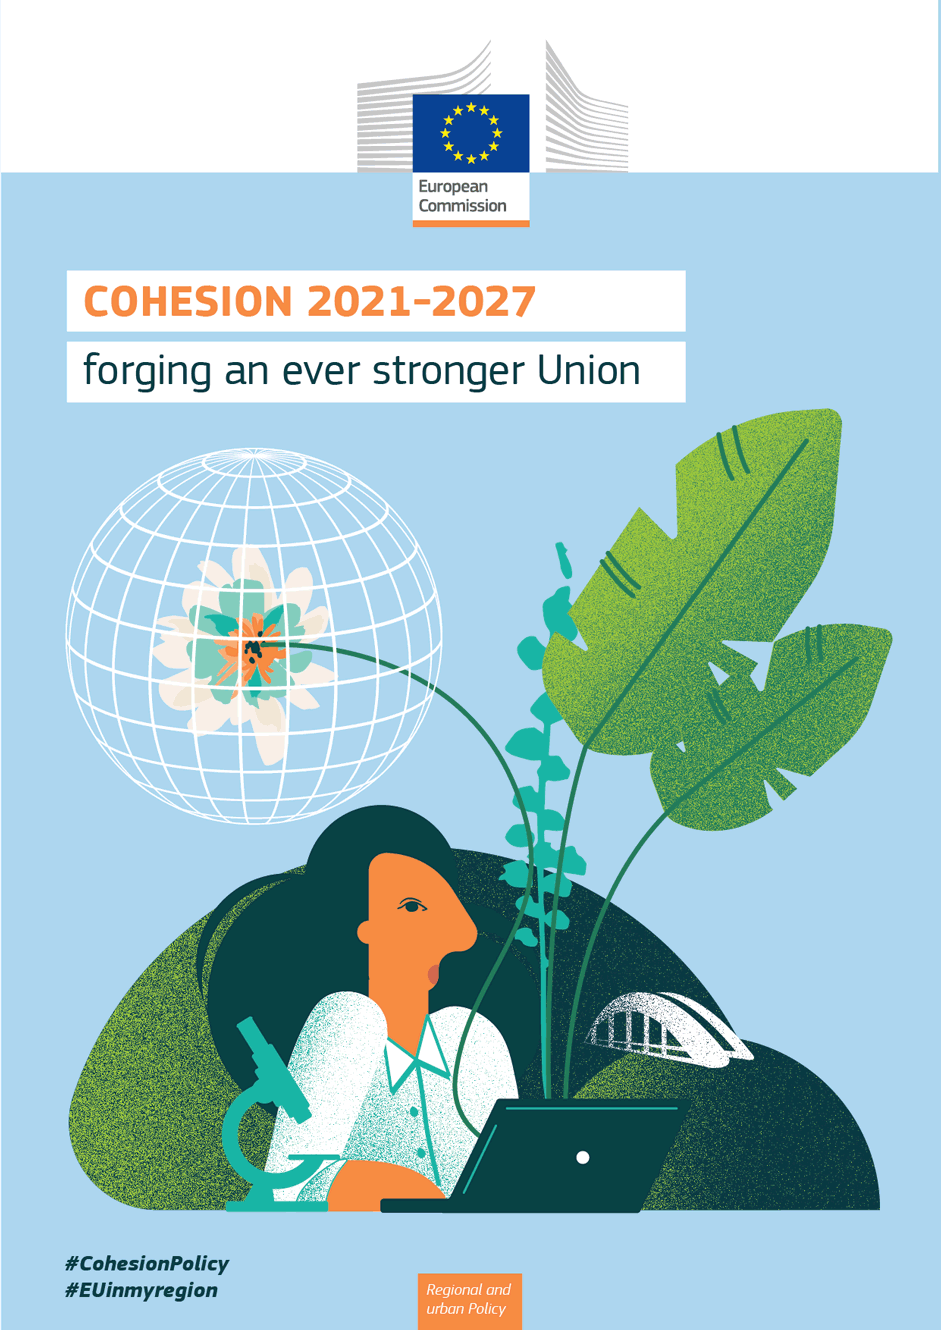 Cohesion 2021-2027: forging an ever-stronger Union - Report on the outcome of 2021-2027 cohesion policy programming